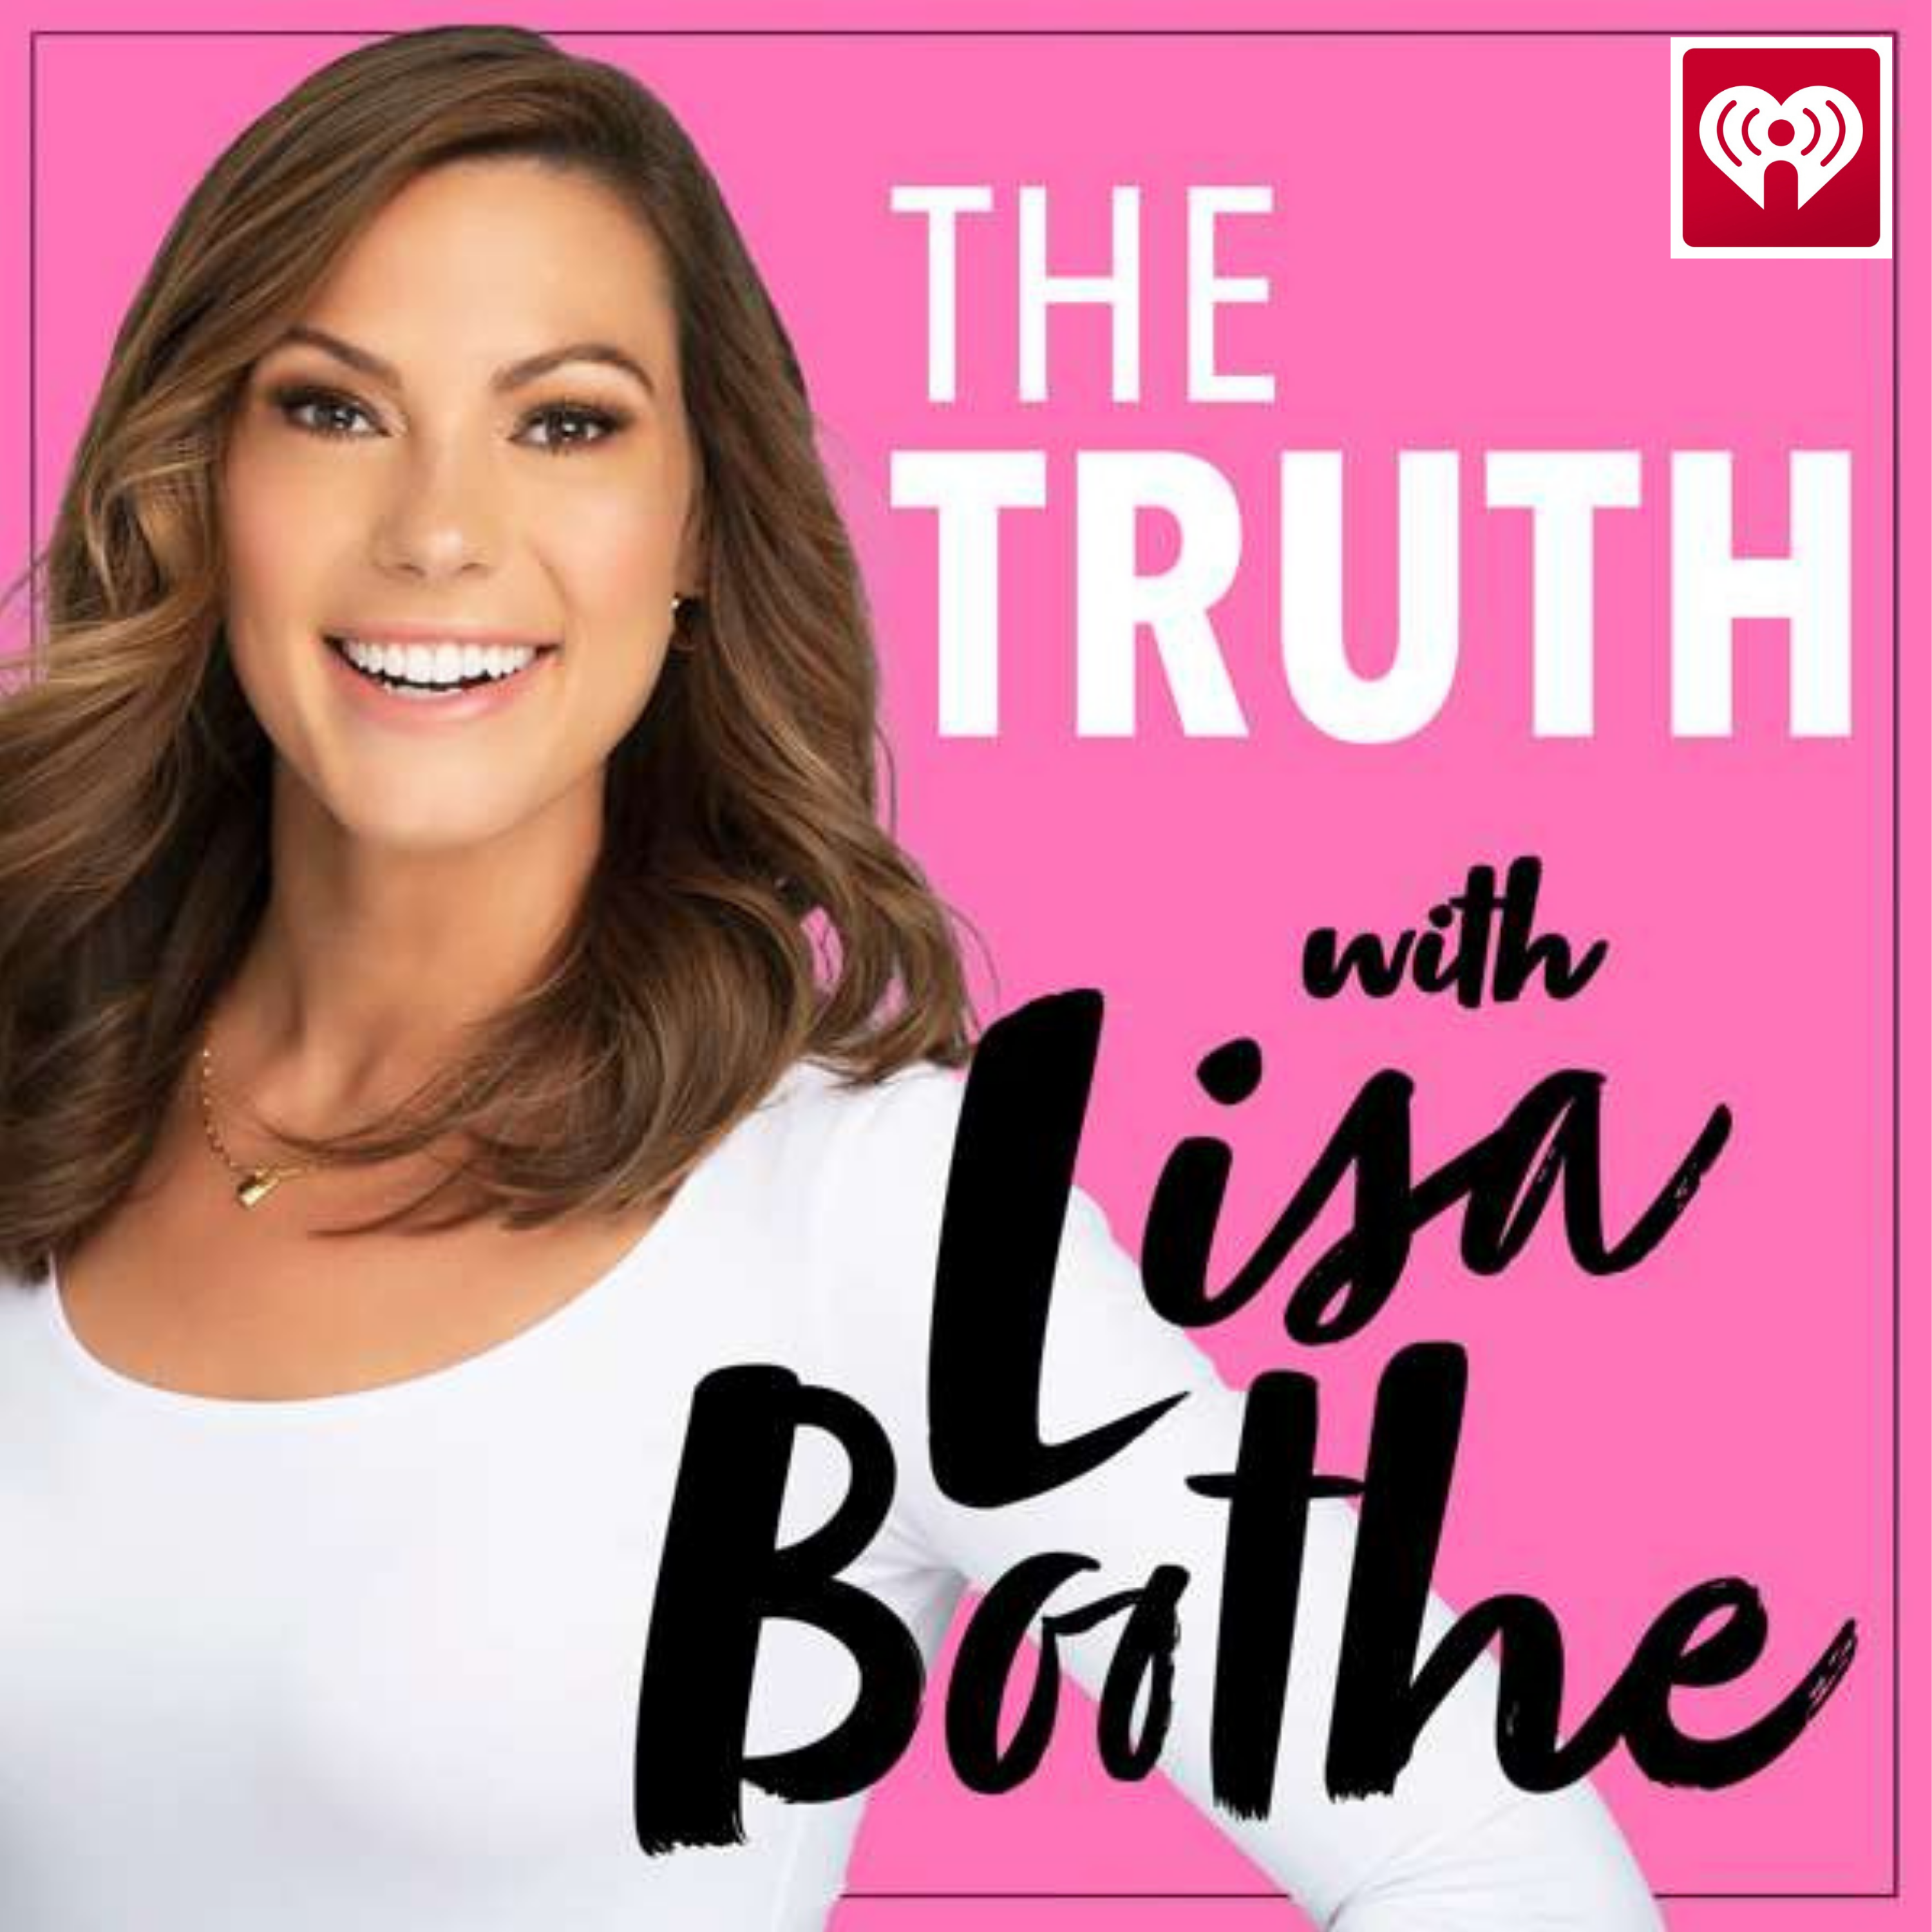 The Truth with Lisa Boothe: Getting to Know Pennsylvania's Dave McCormick